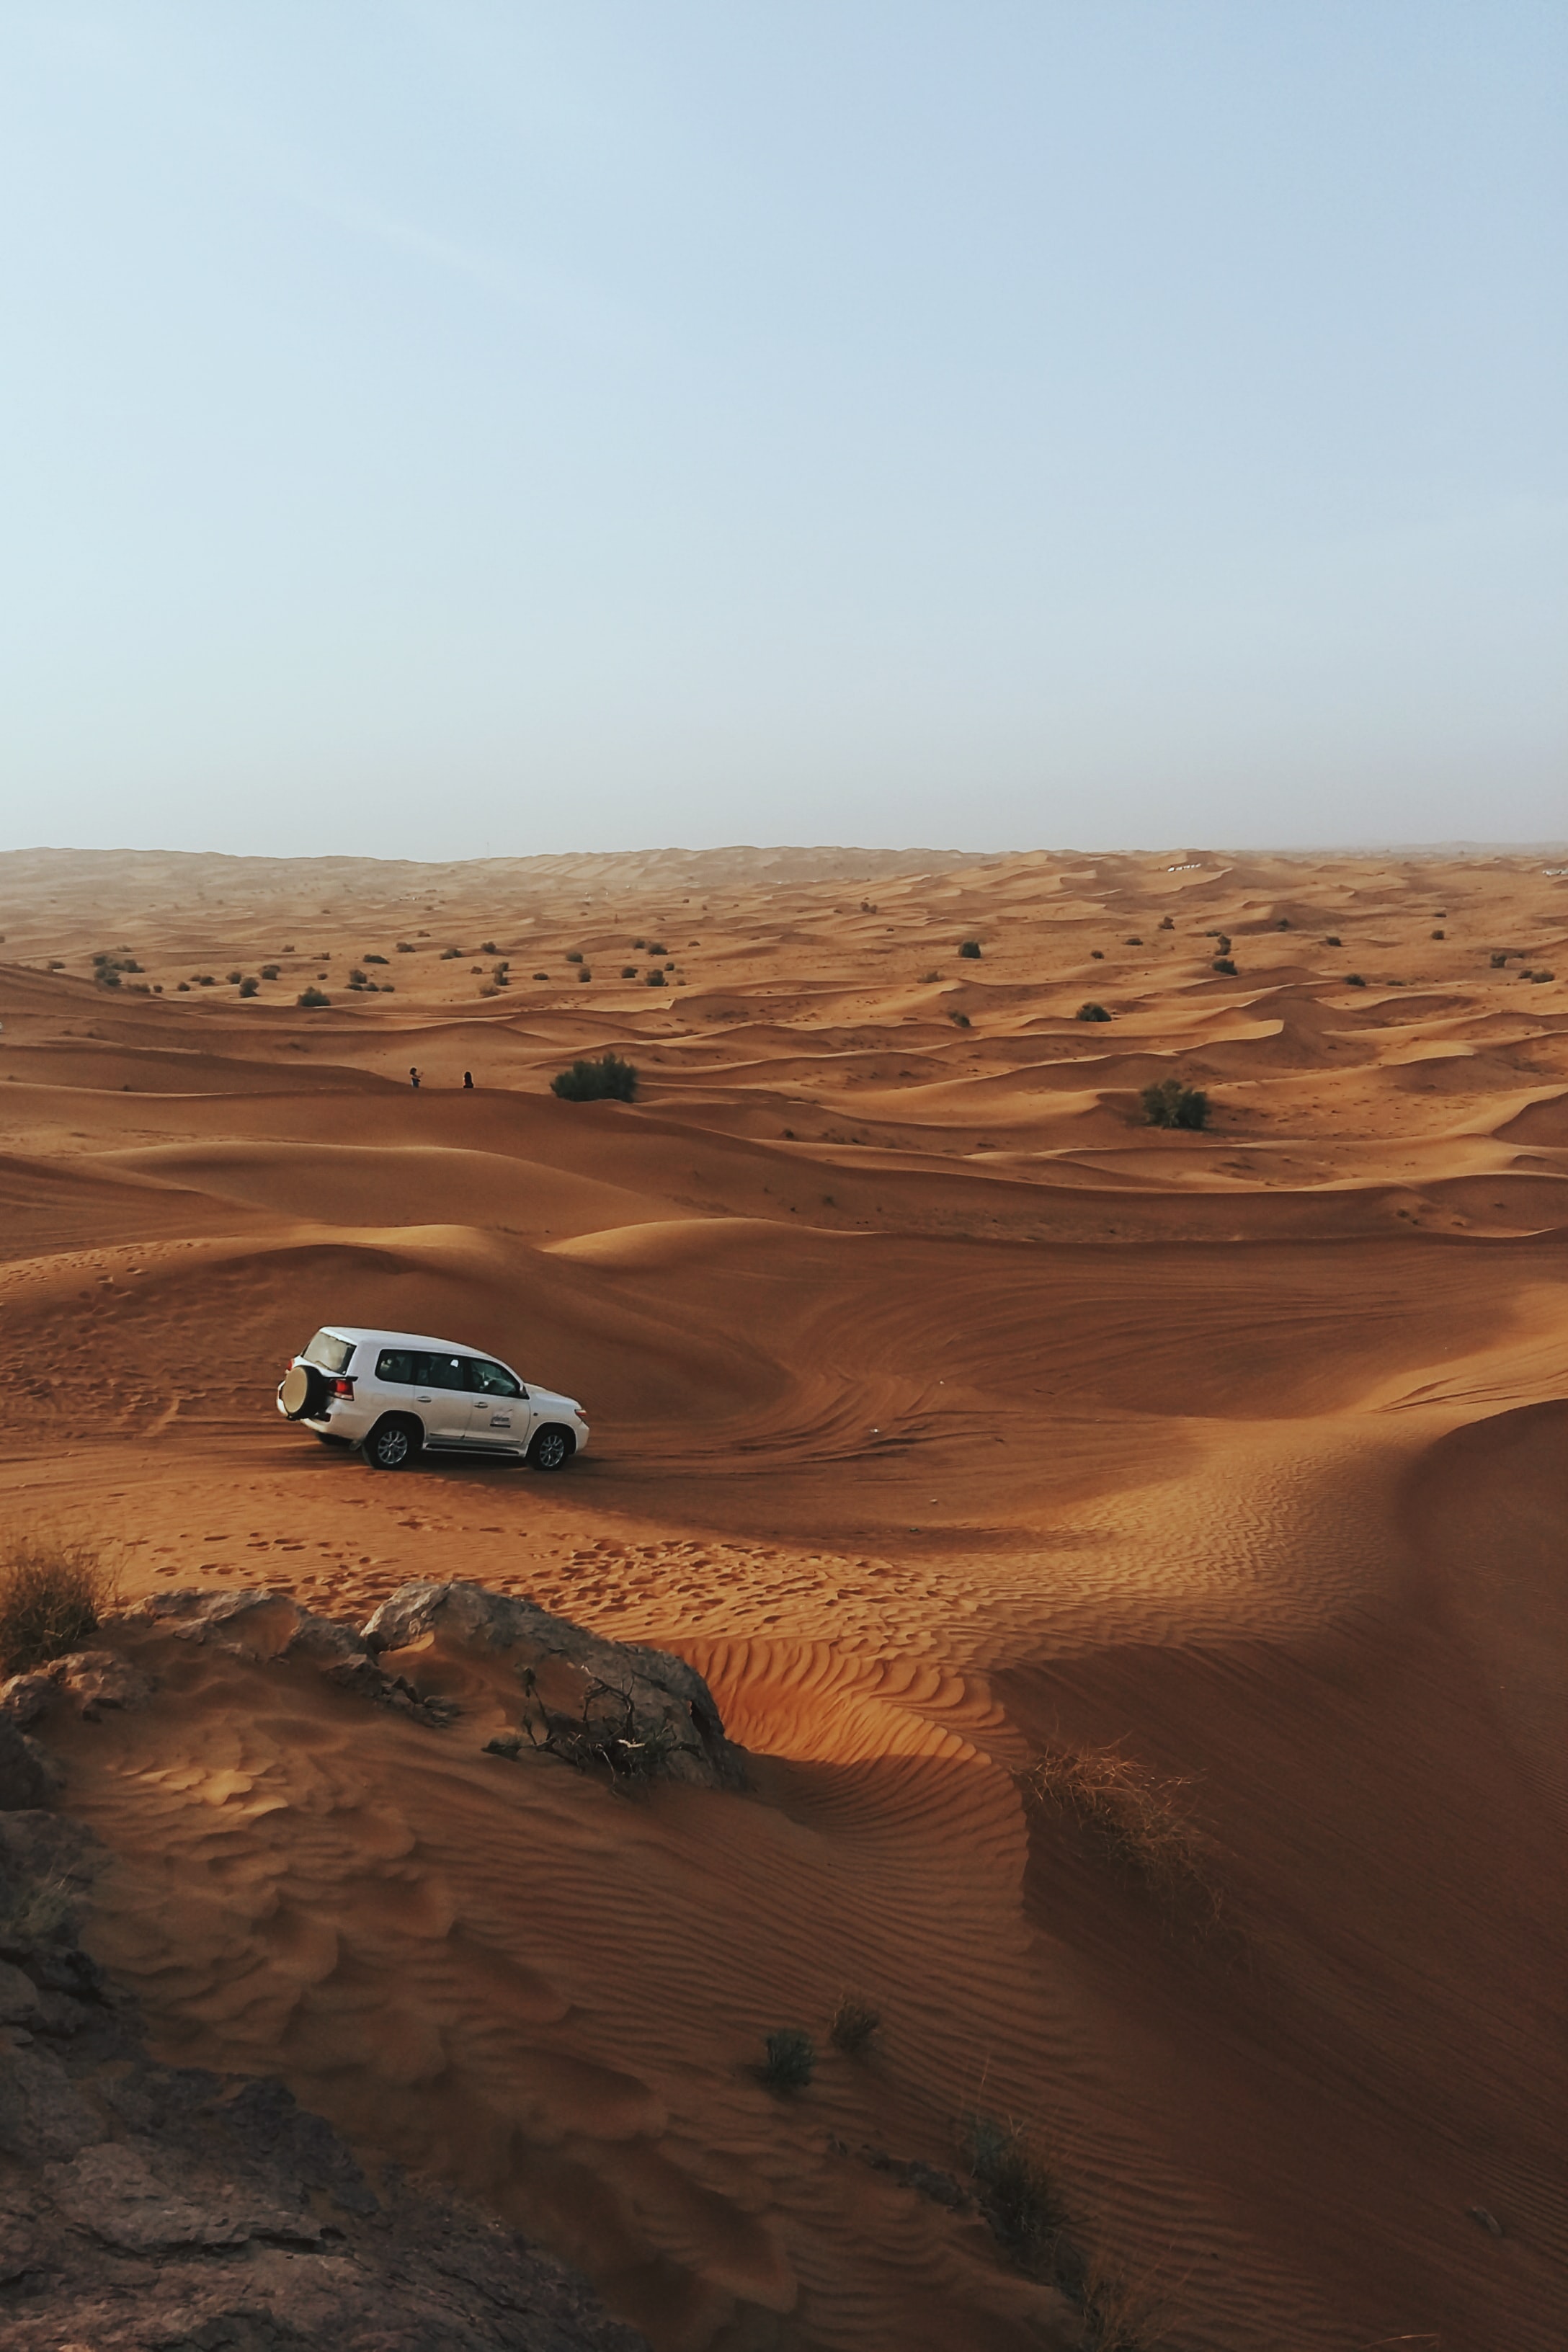 Dubai deser dunes fun for tourists and residents